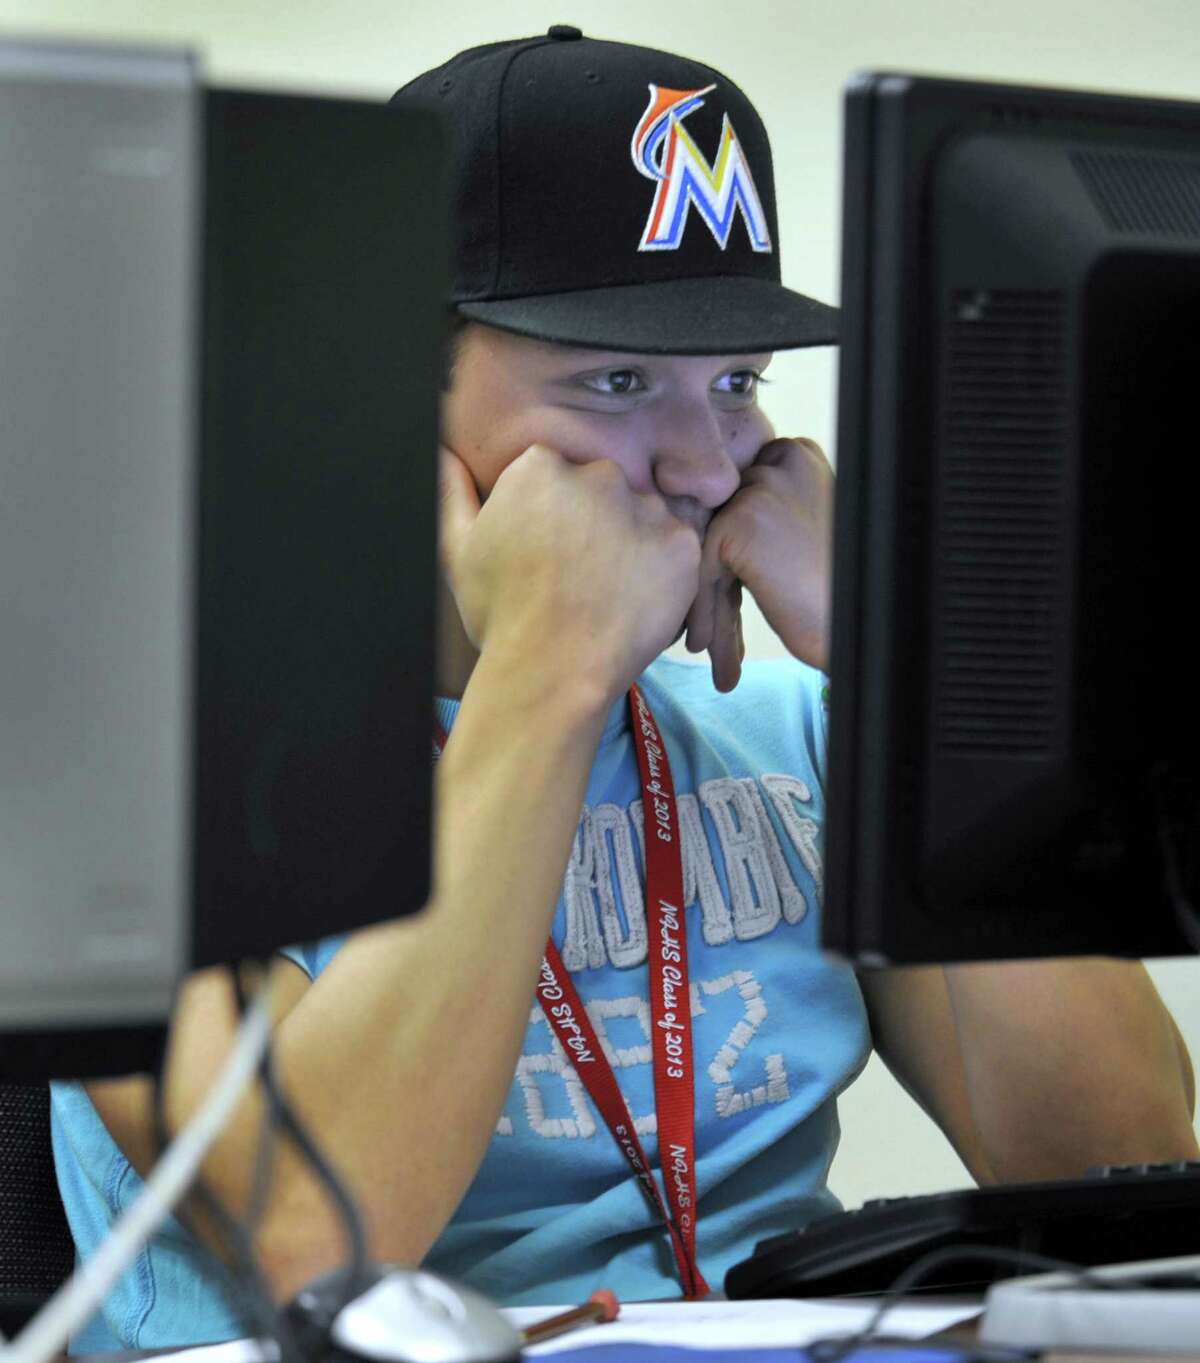 George Tacuri, 18, of New Fairfield, takes a placement test for admission to Naugatuck Valley Community College Friday, June 28, 2013 at the school's Main Street Danbury facility. The college has permission to grant associate degrees and to triple its space in Danbury, Conn.